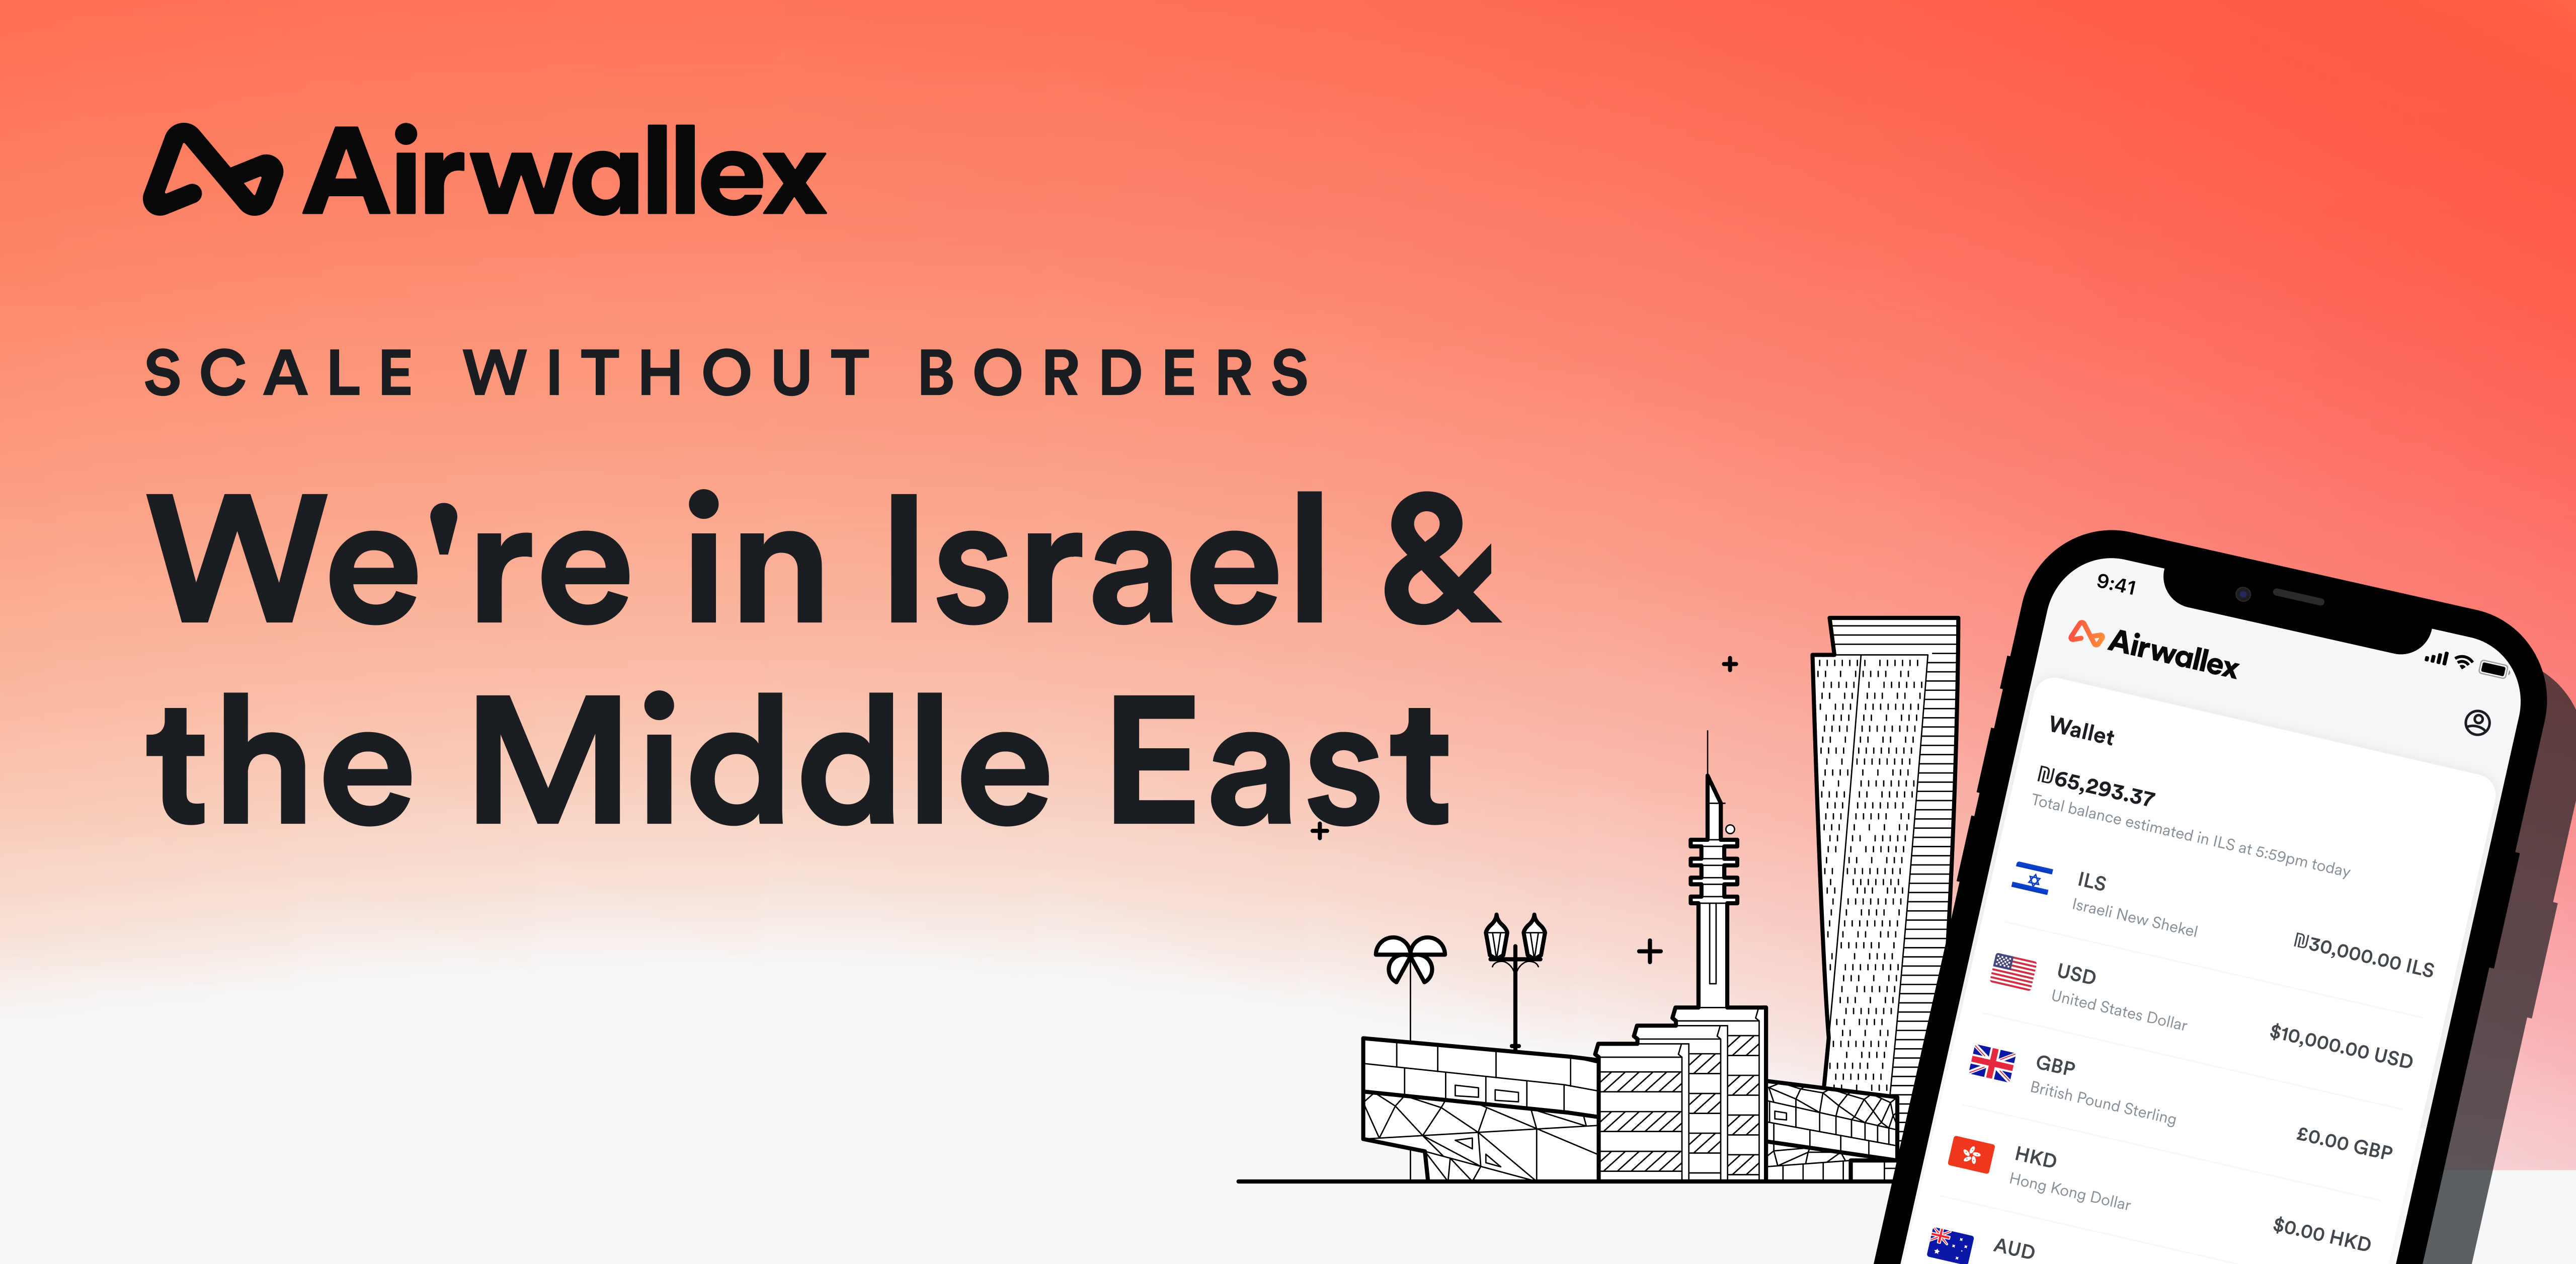 Airwallex launches operations in Israel, plans expansion across Middle East